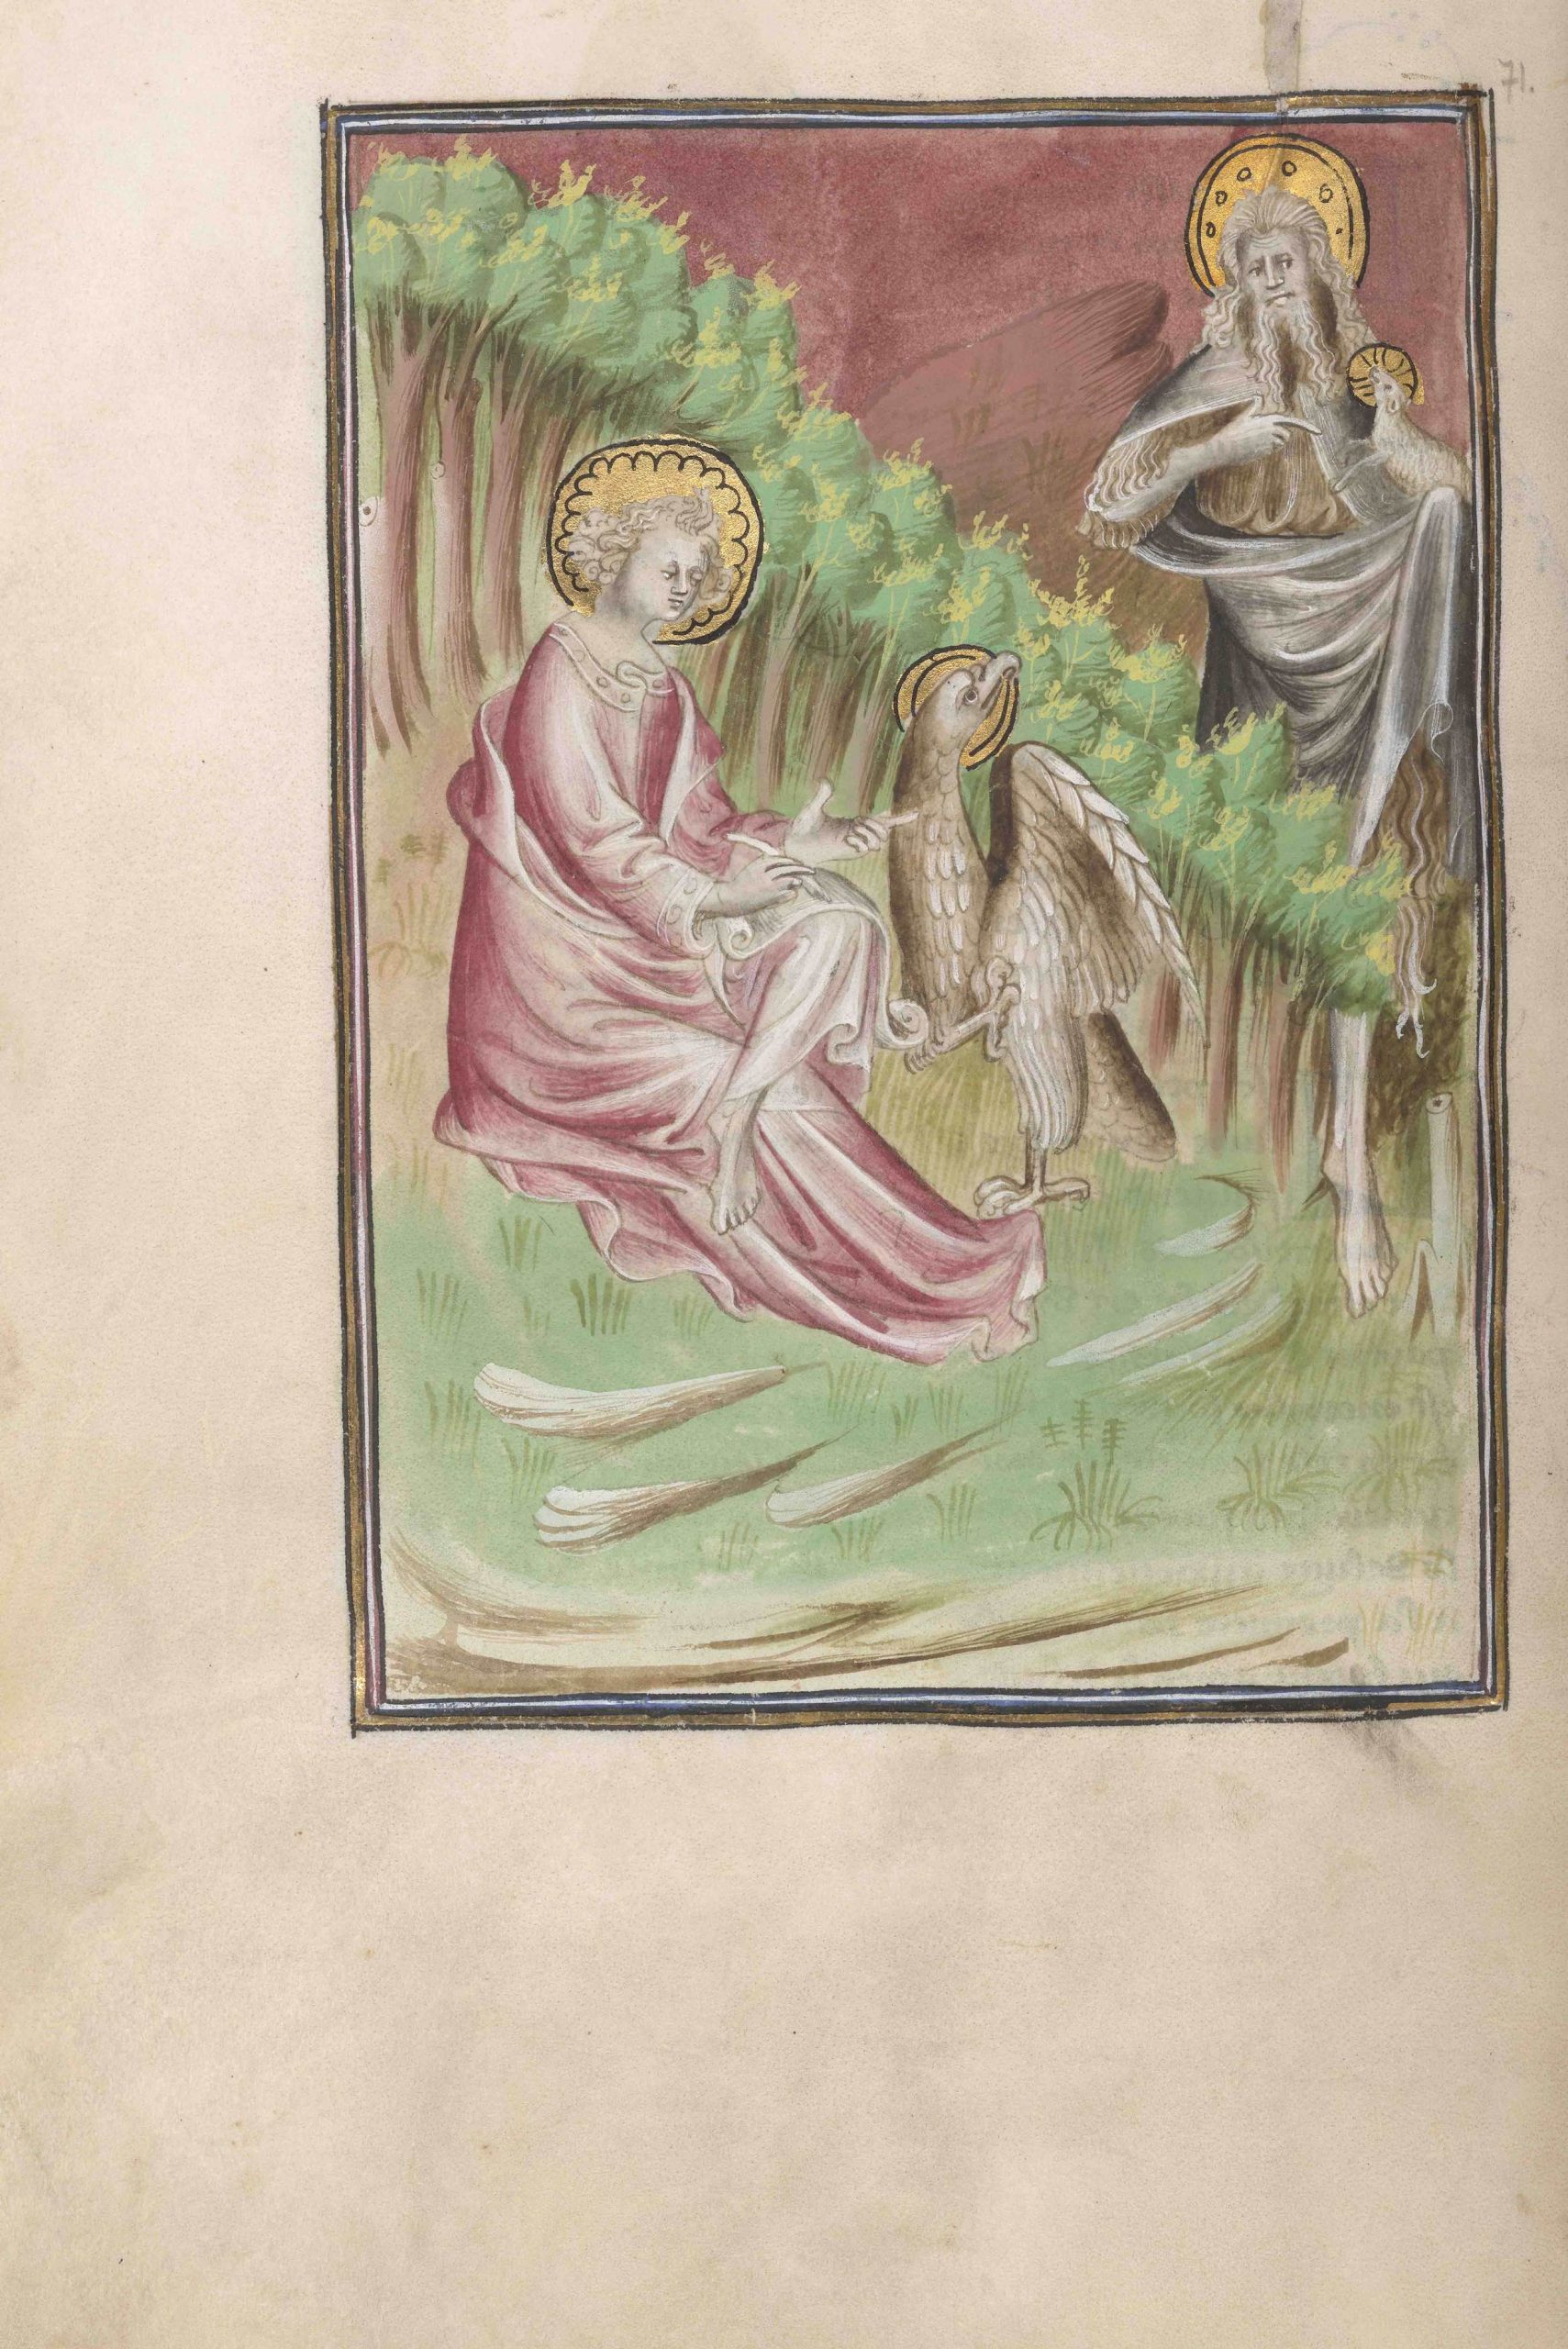 extract from the Berry Apocalypse; folio 71 verso showing John the Evangelist and John the Baptist